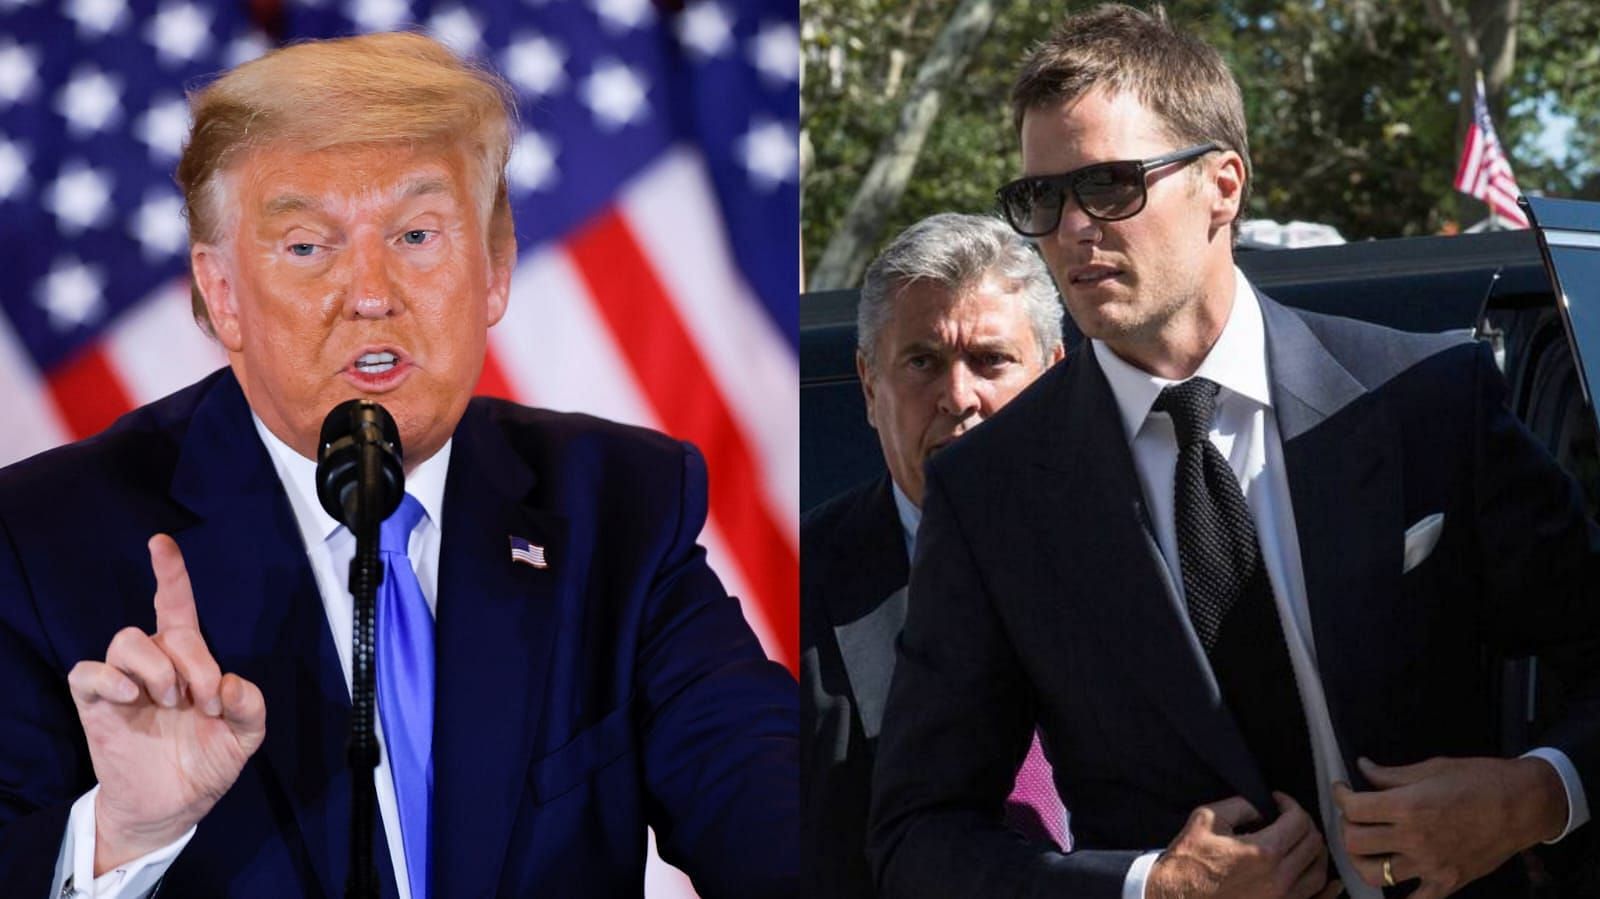 Donald Trump was adamant that Tom Brady had no role to play in the Deflategate scandal